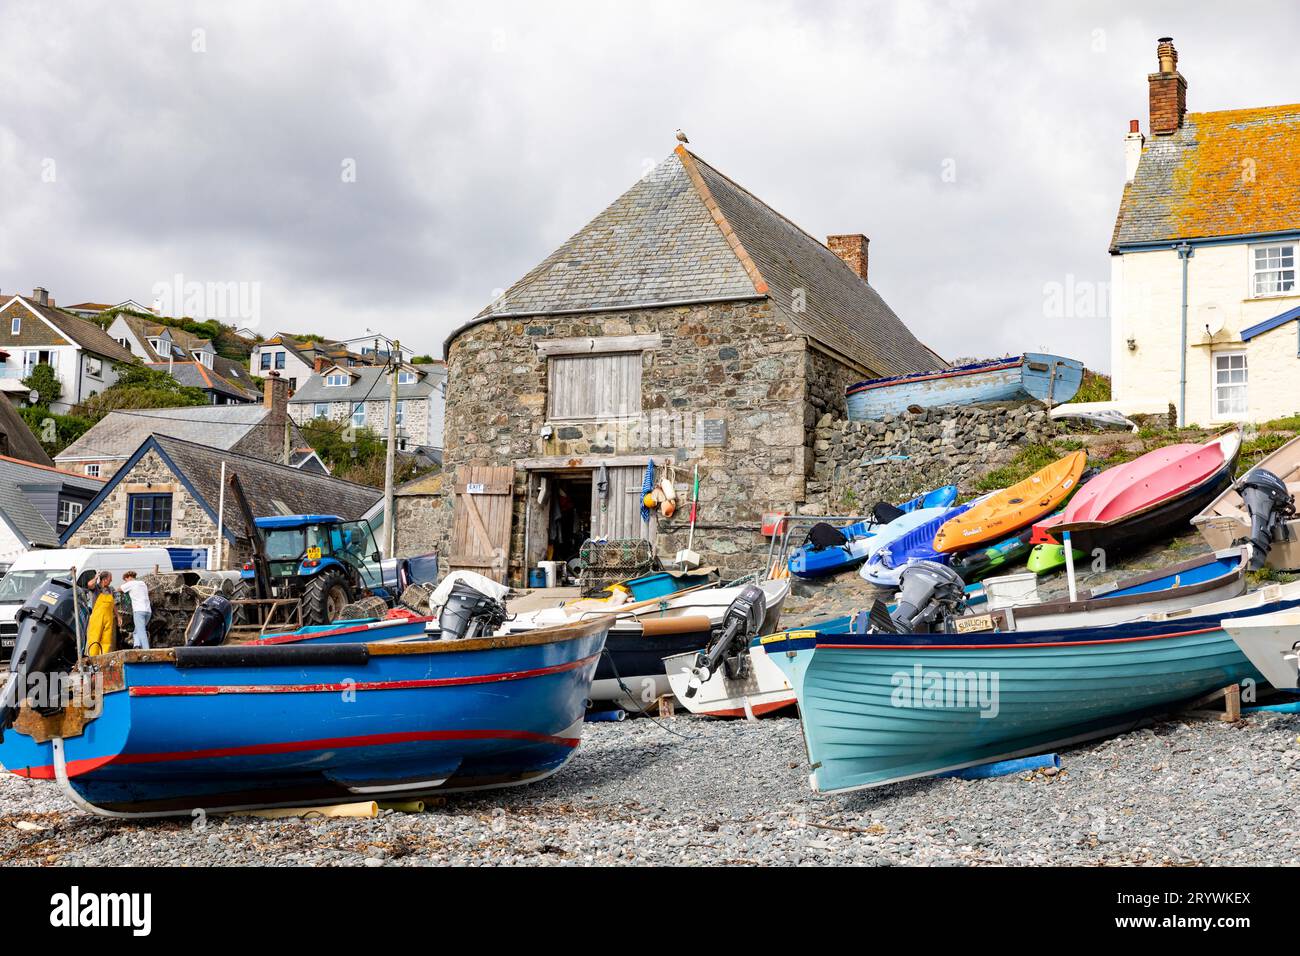 Cadgwith a Cornish village on the Lizard Peninsula is a small fishing port with fishing vessels boats on the working harbour beach, England,UK Stock Photo